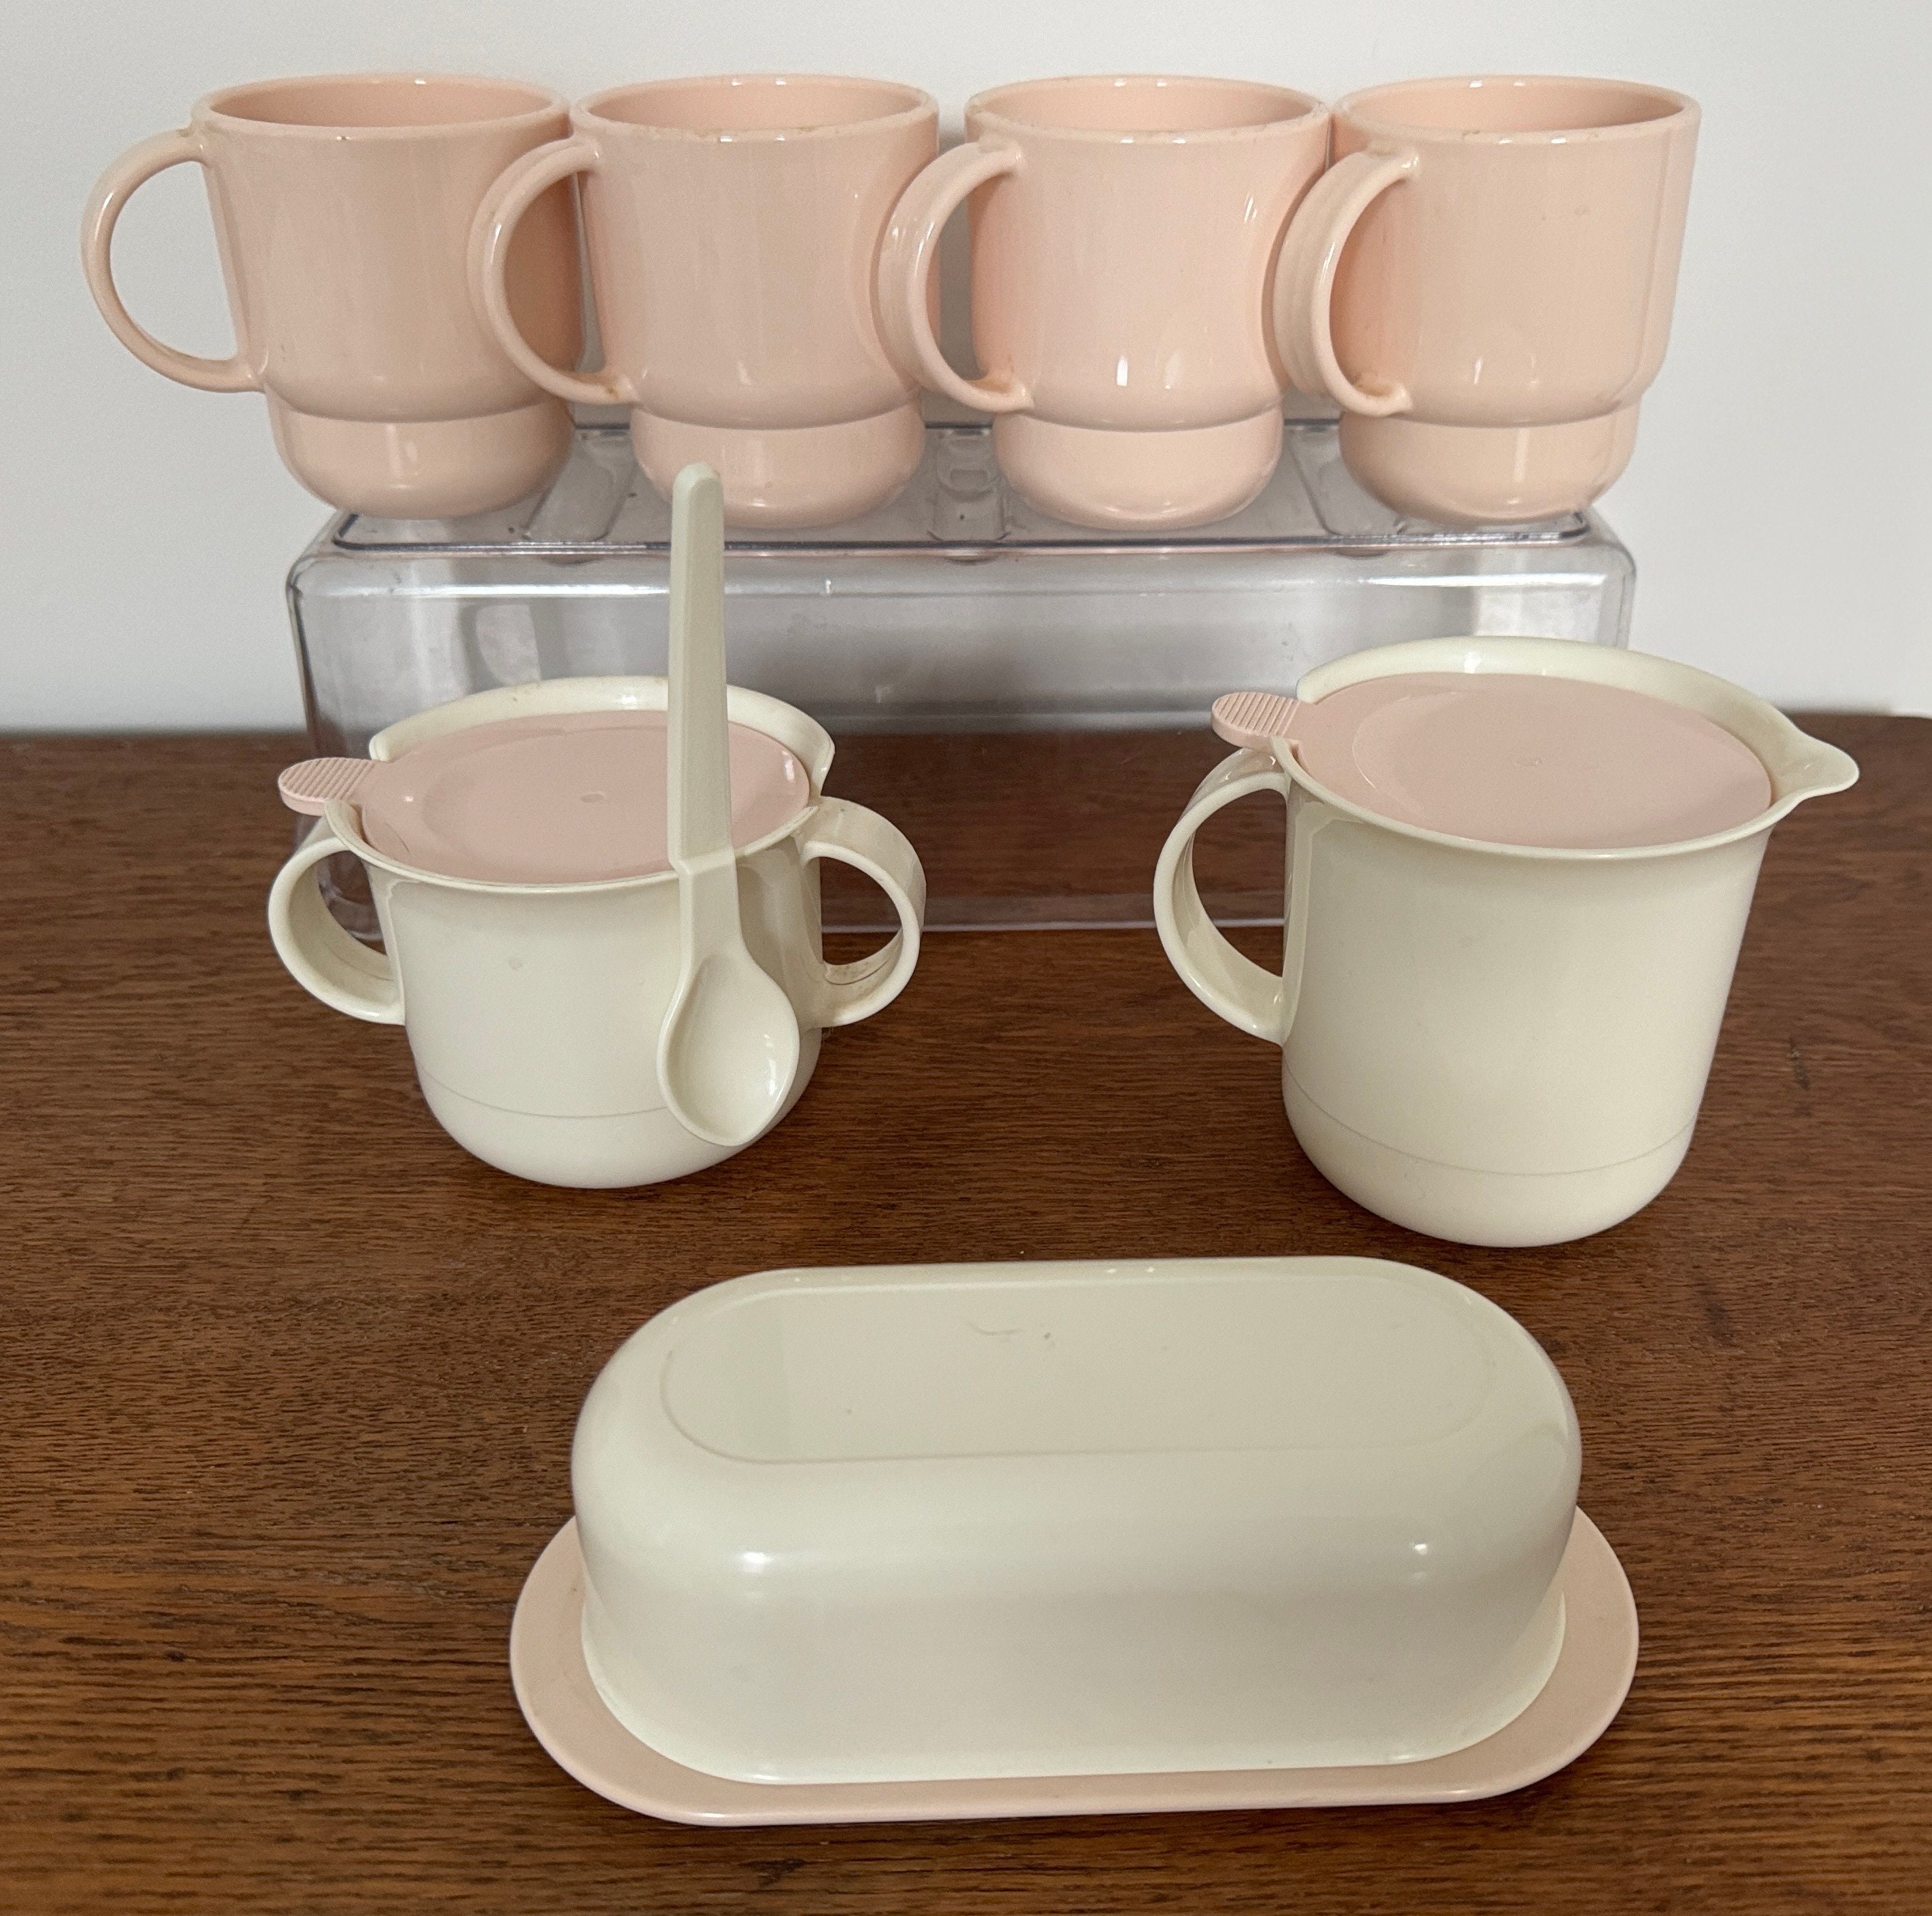  Tupperware Snack Cup Lunch Set of 5 Small Bowls HTF